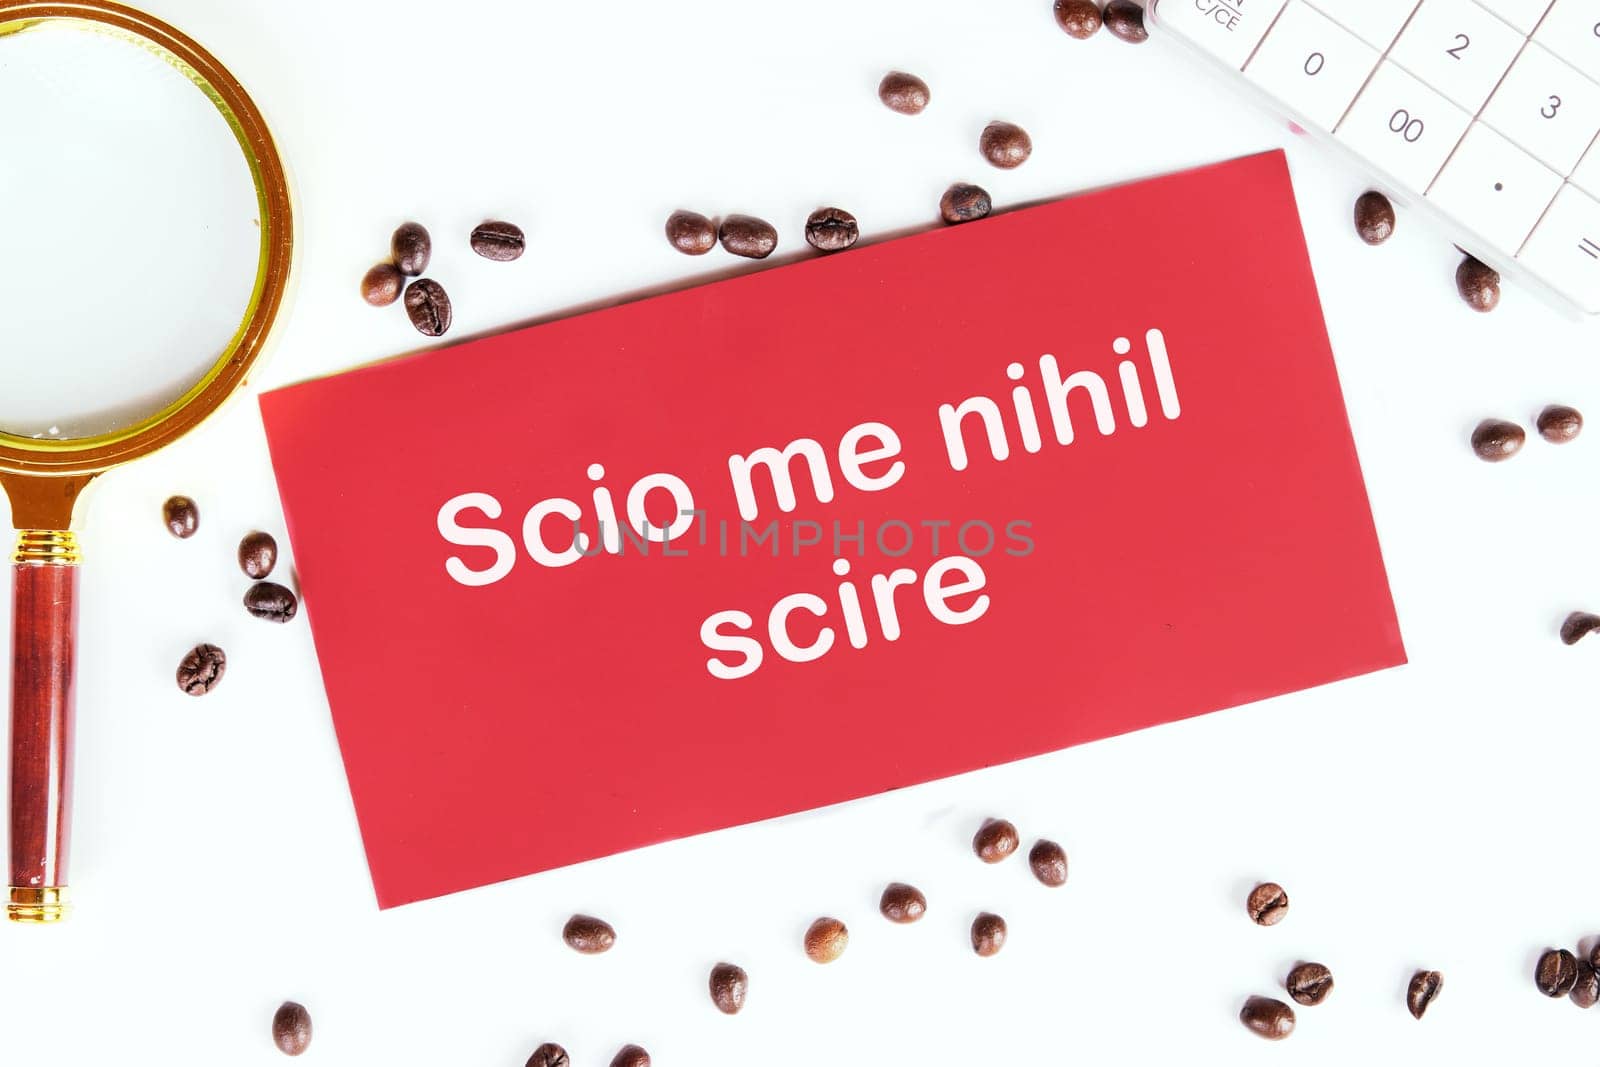 Scio me nihil scire It is translated from Latin as I know I don't know anything. It's written on the red card